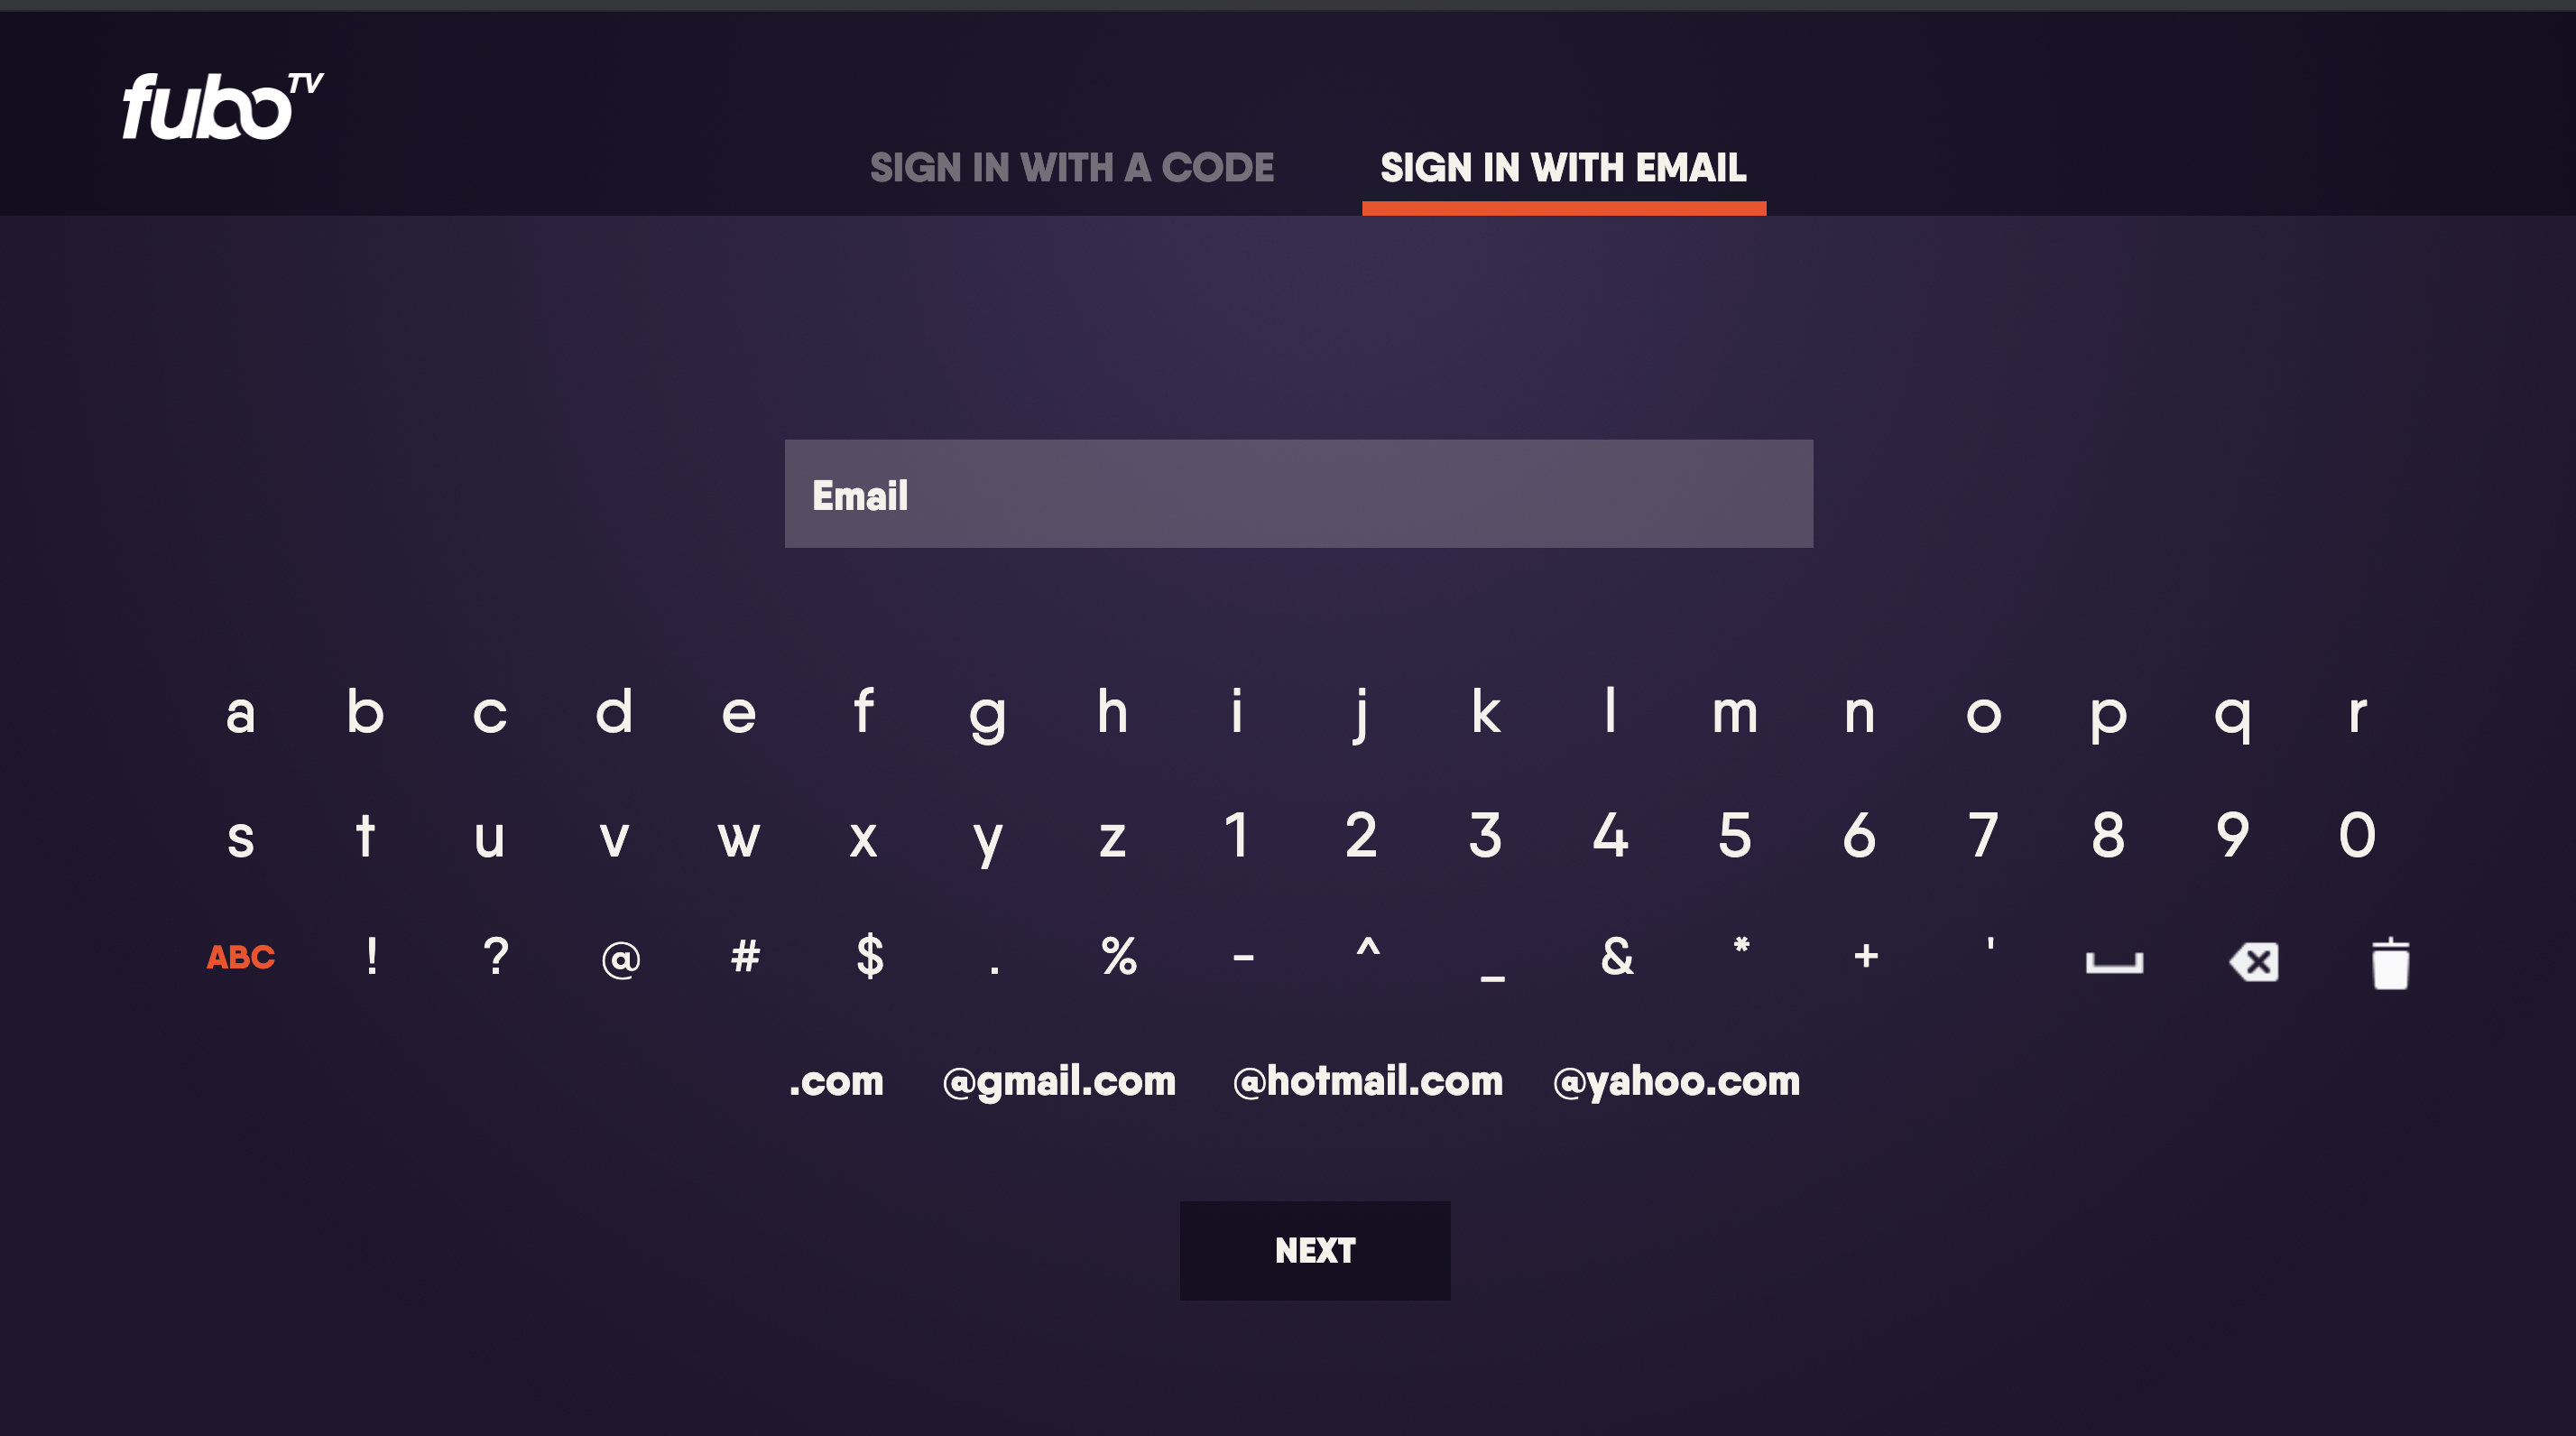 Manual sign in screen for the FuboTV app on LG TV; sign in by entering email and password using the remote and on-screen keyboard